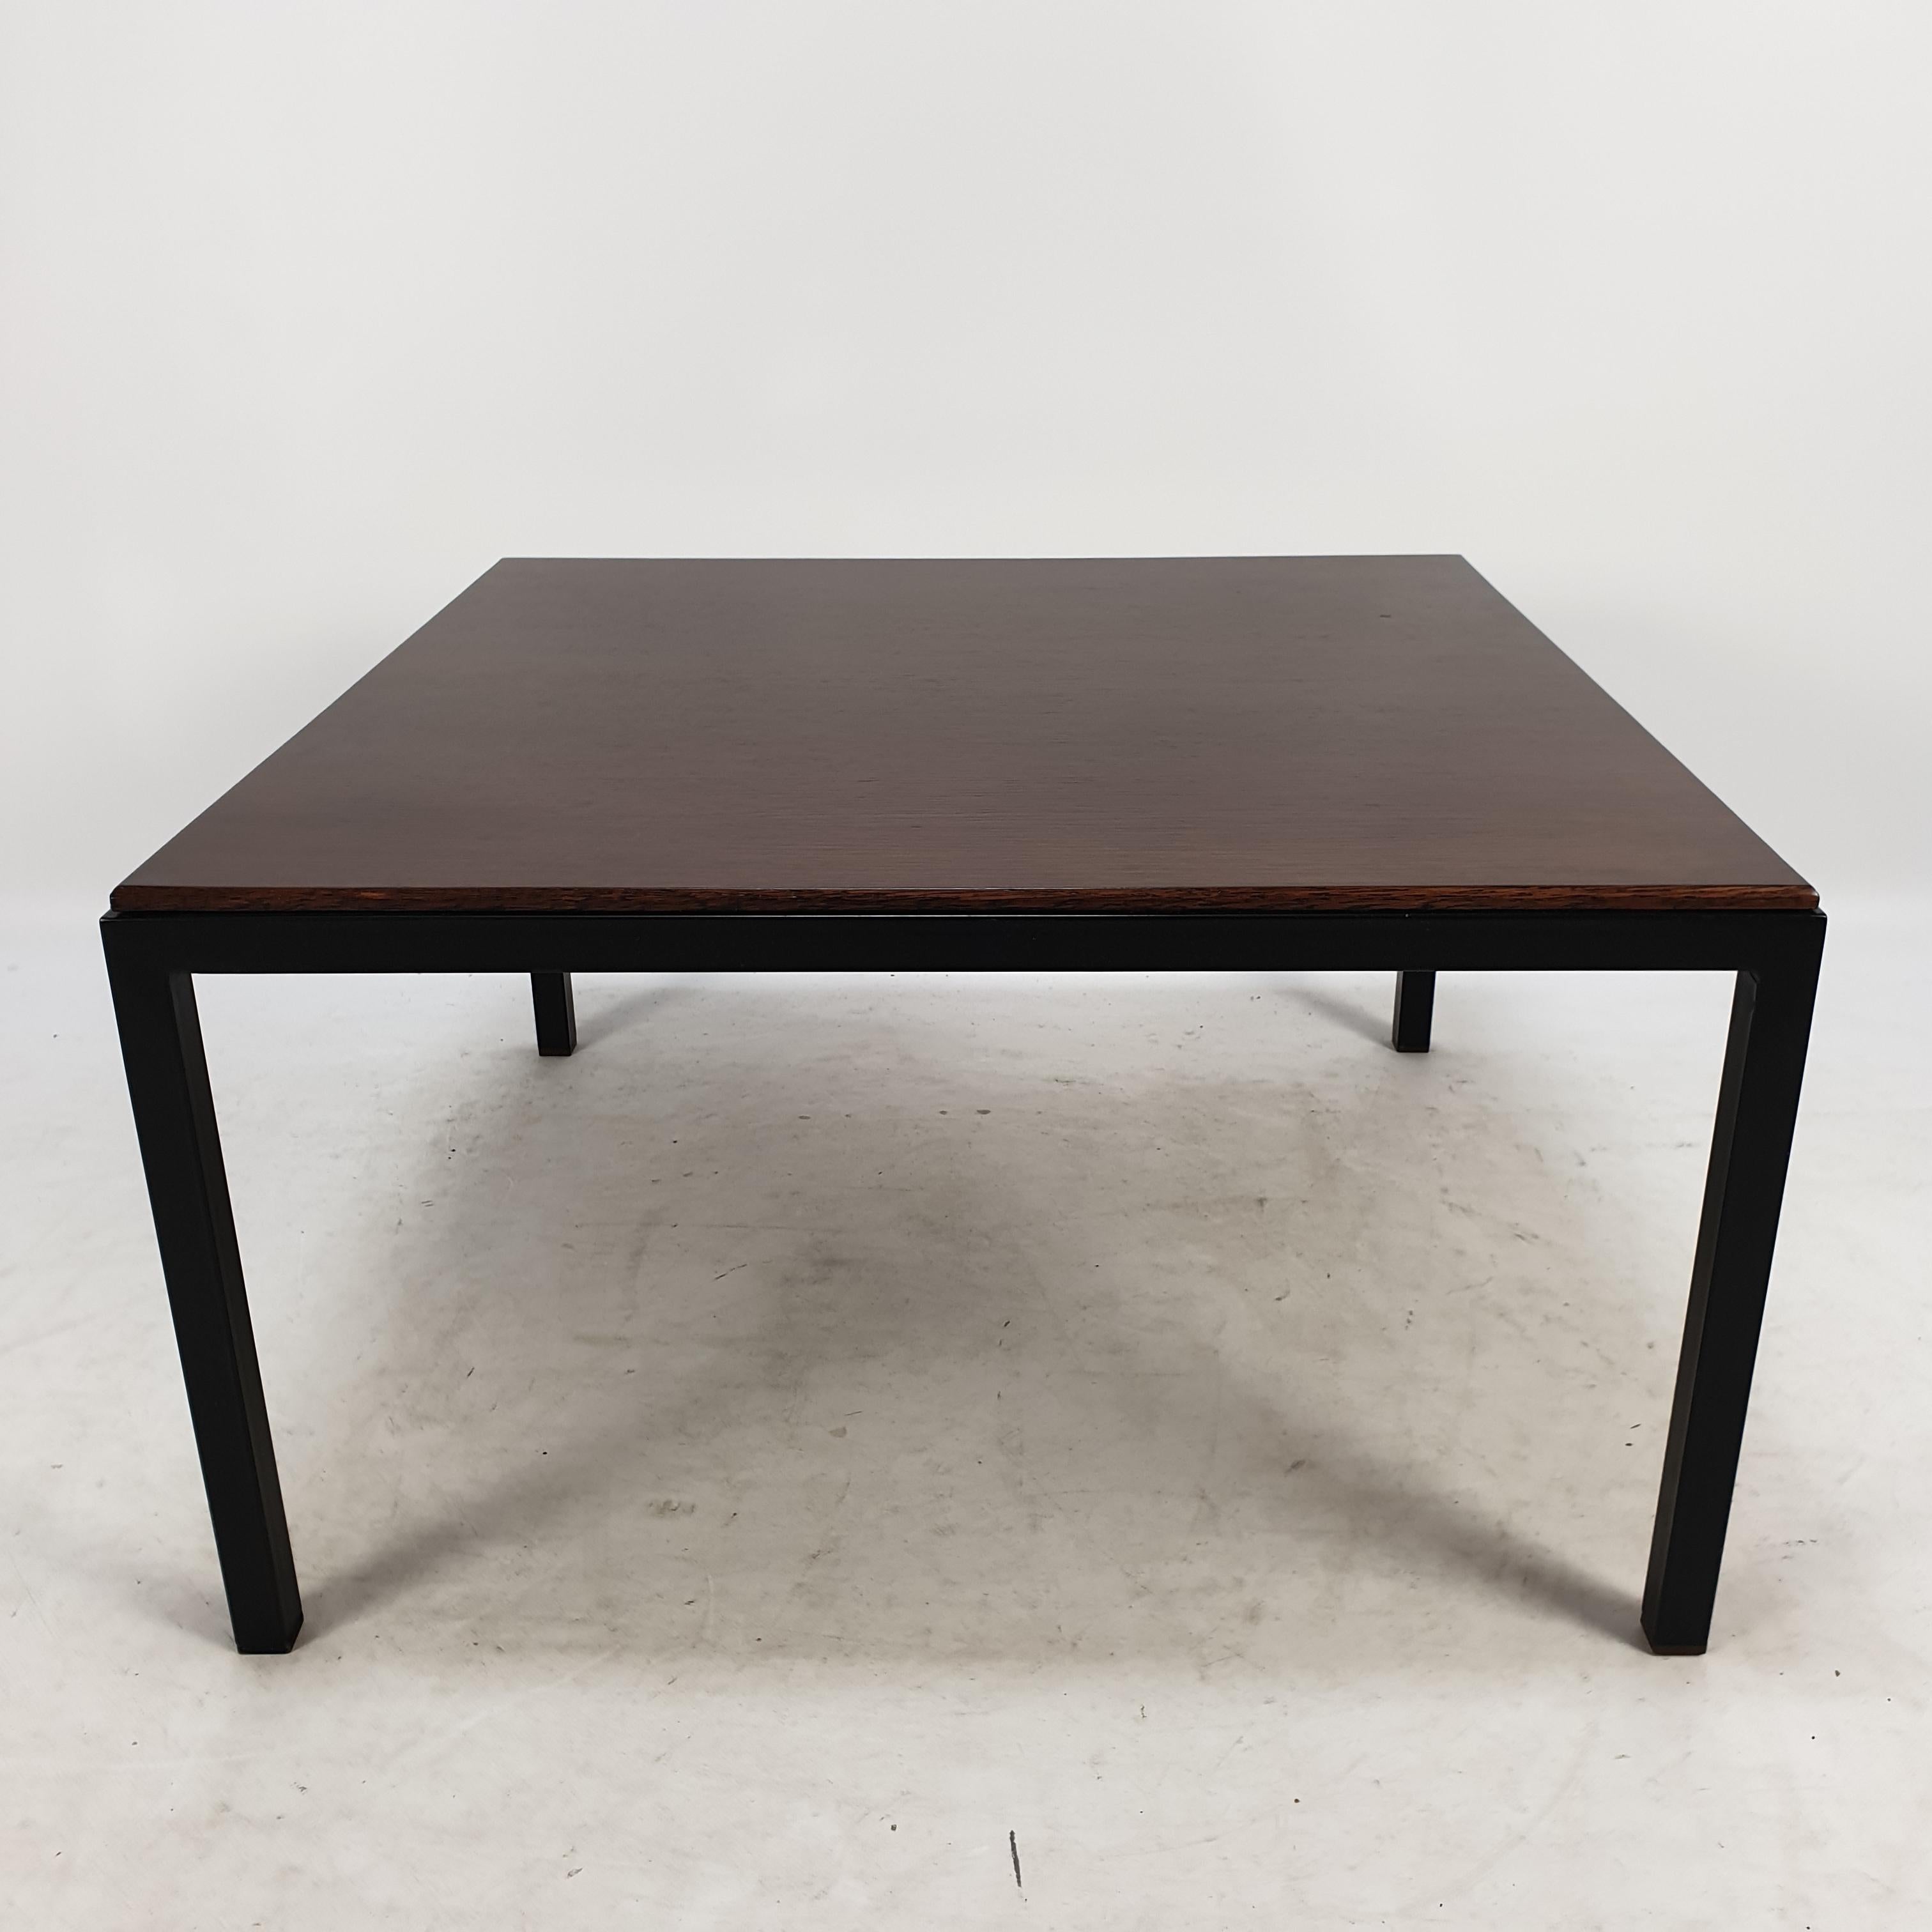 Rare Italian coffee table, designed by Osvaldo Borsani for Tecno Milan in the 60's. 

Lovely teak wood plate on a metal base. 

It can be used as a side table or as a coffee table.